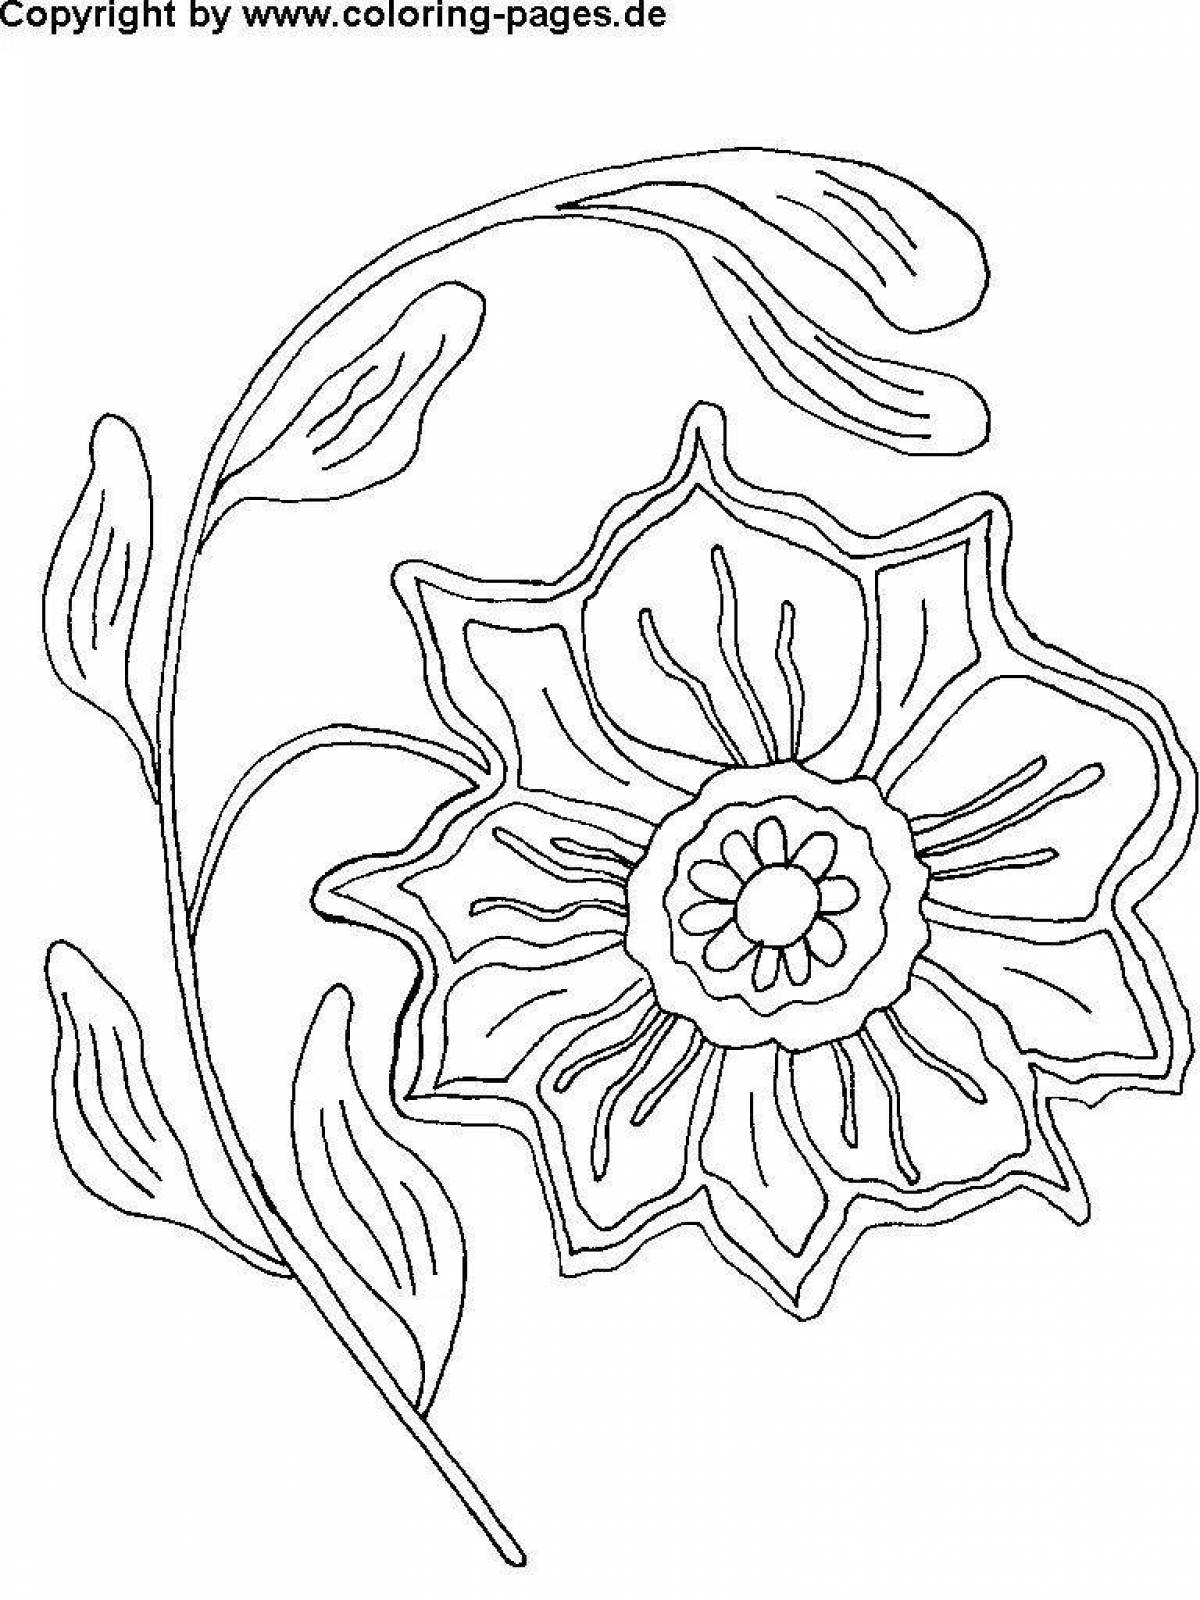 Coloring book shiny scarlet flower